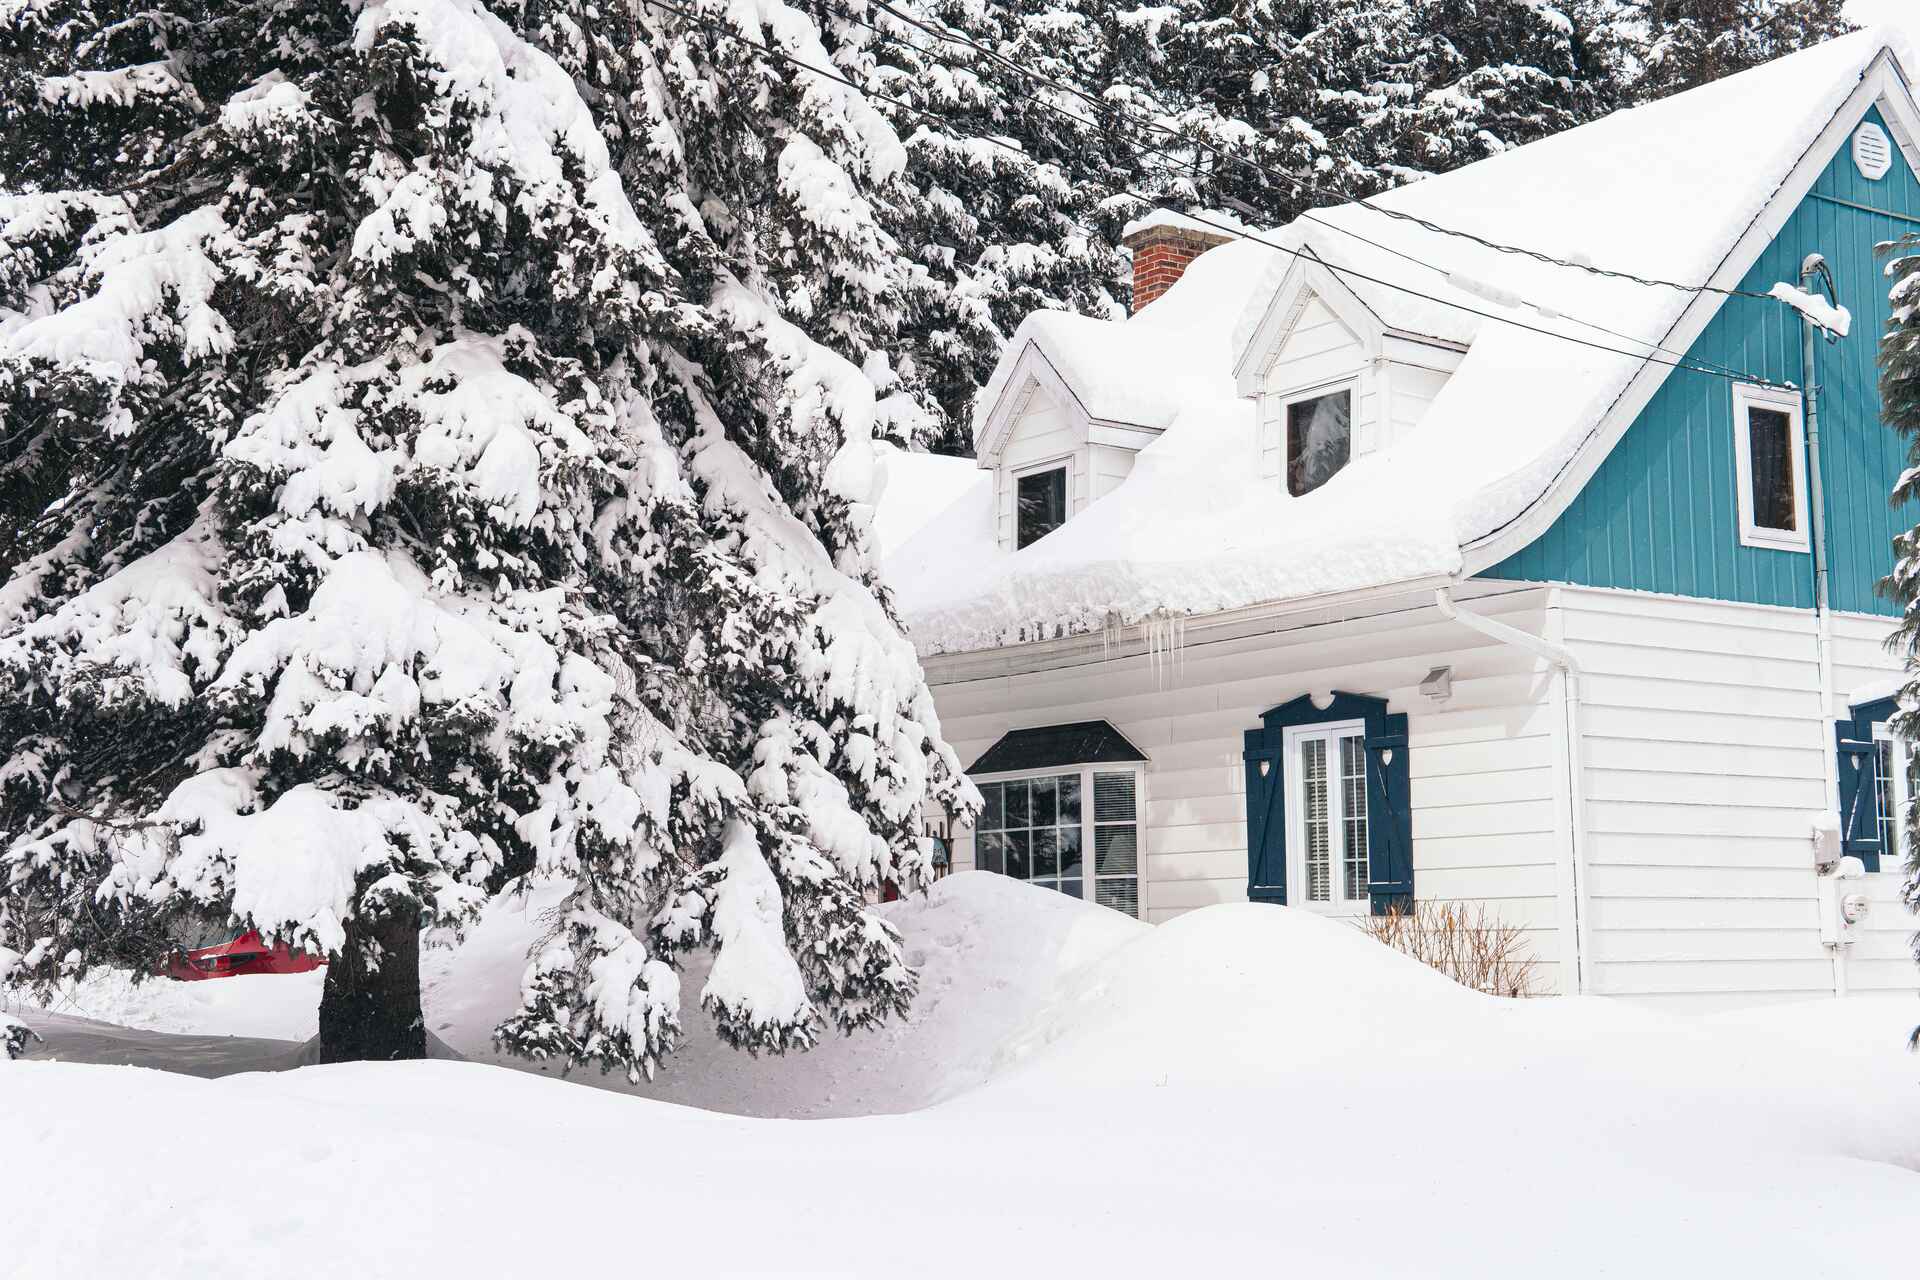 House covered by snow